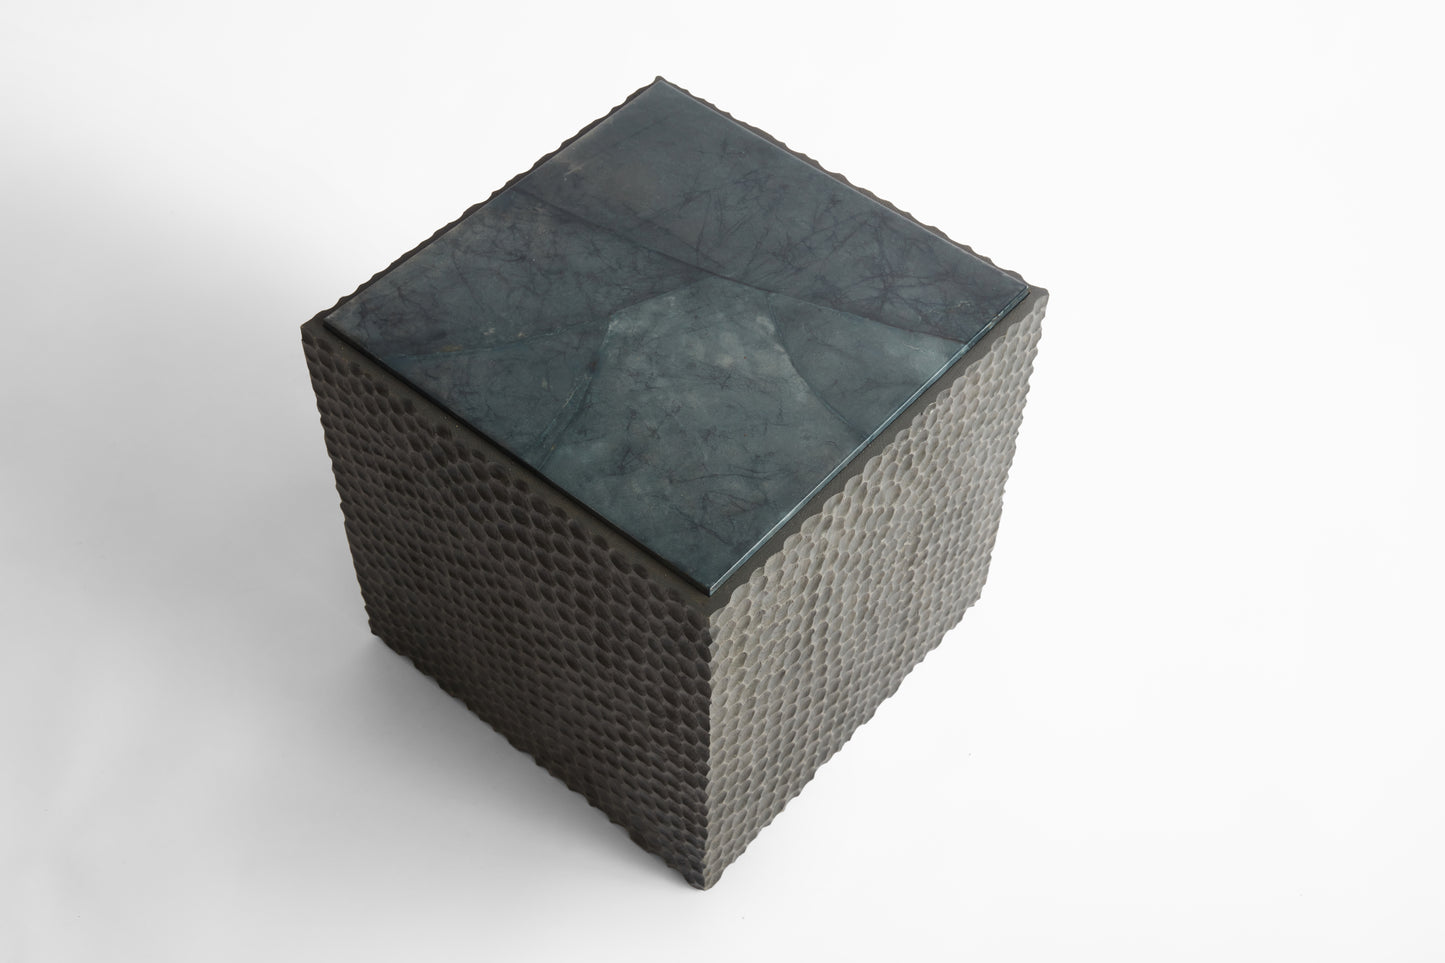 Shown in Chiseled Charcoal Oak base with Indigo Ripped Parchment top